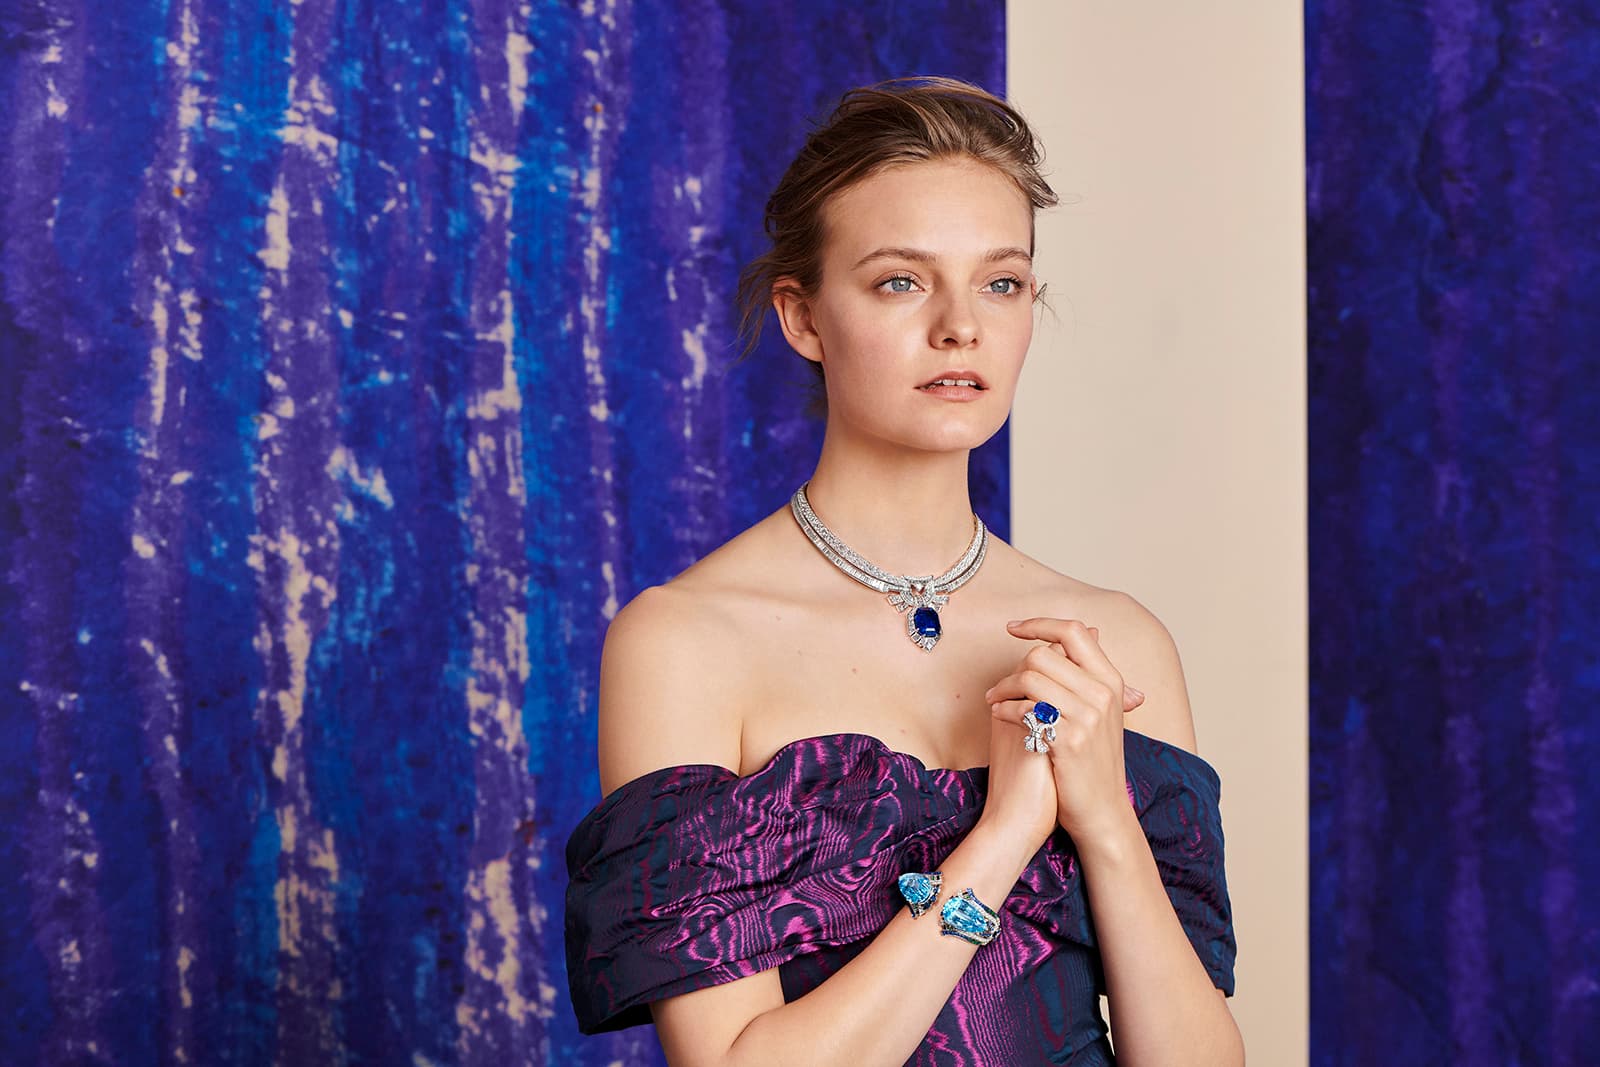  Van Cleef & Arpels 'Romeo and Juliet' collection 'Maiolika' necklace, ring and 'Fiore' bracelet